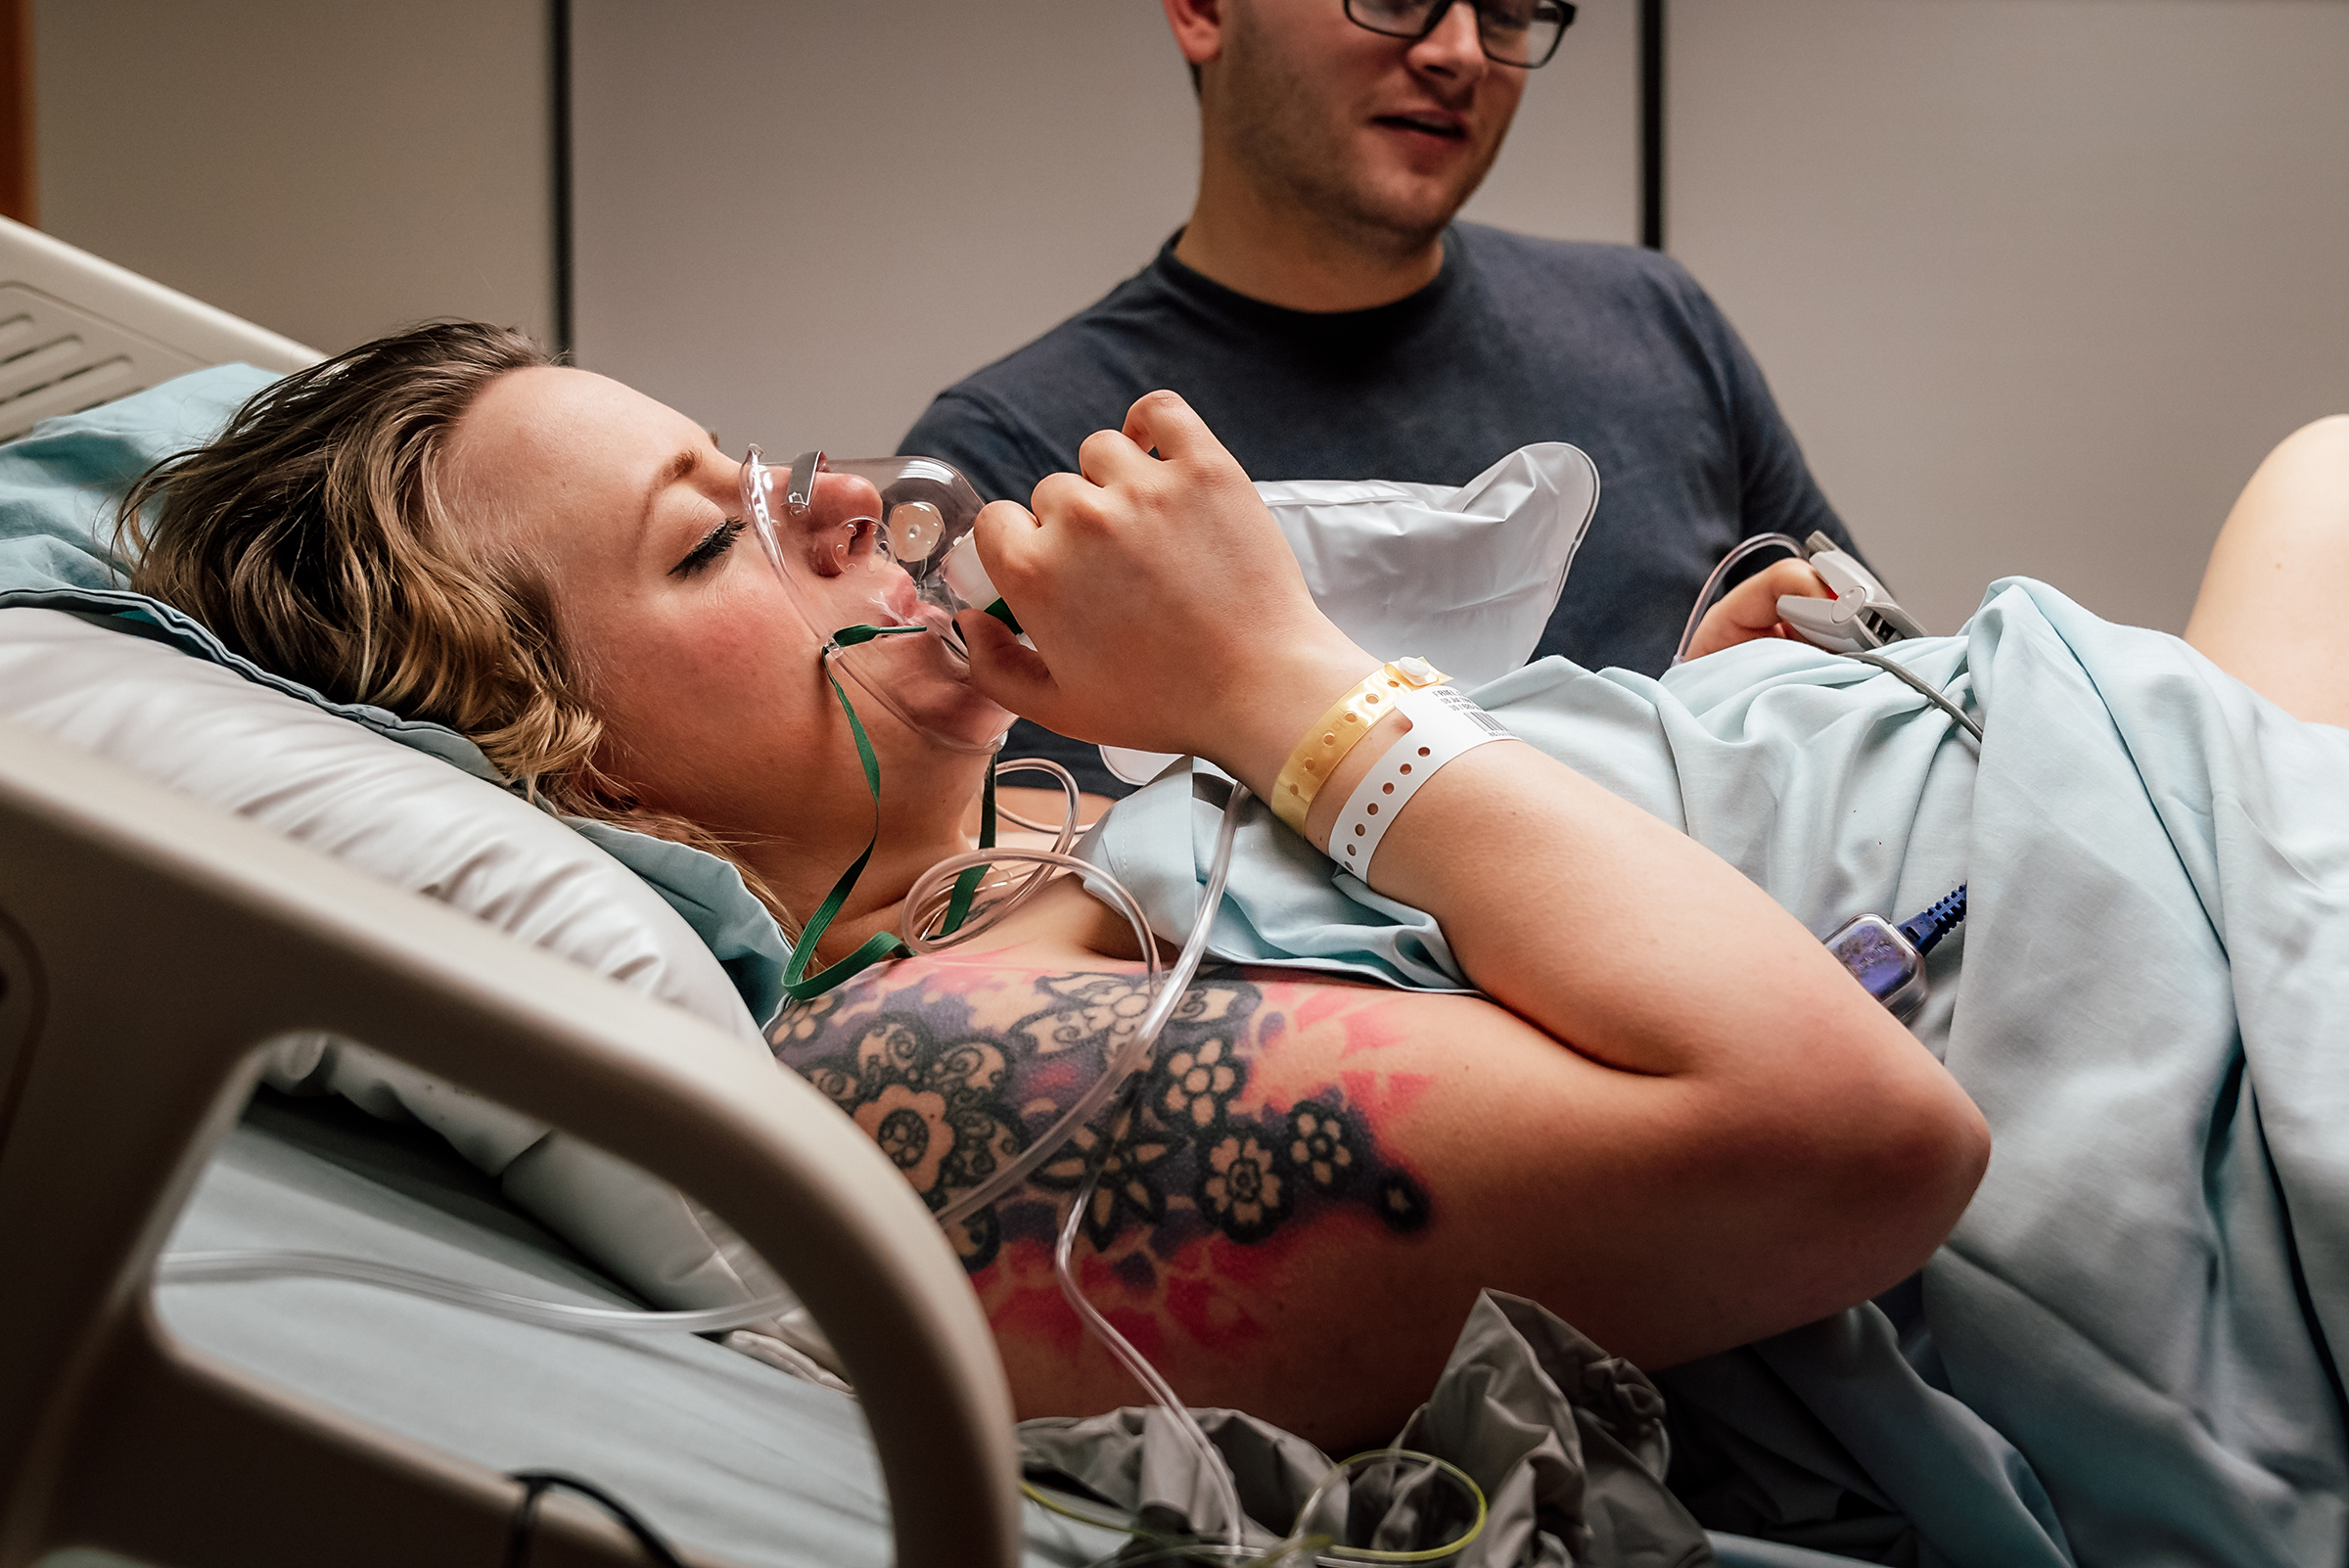 use of oxygen while in labor in the hospital setting. 